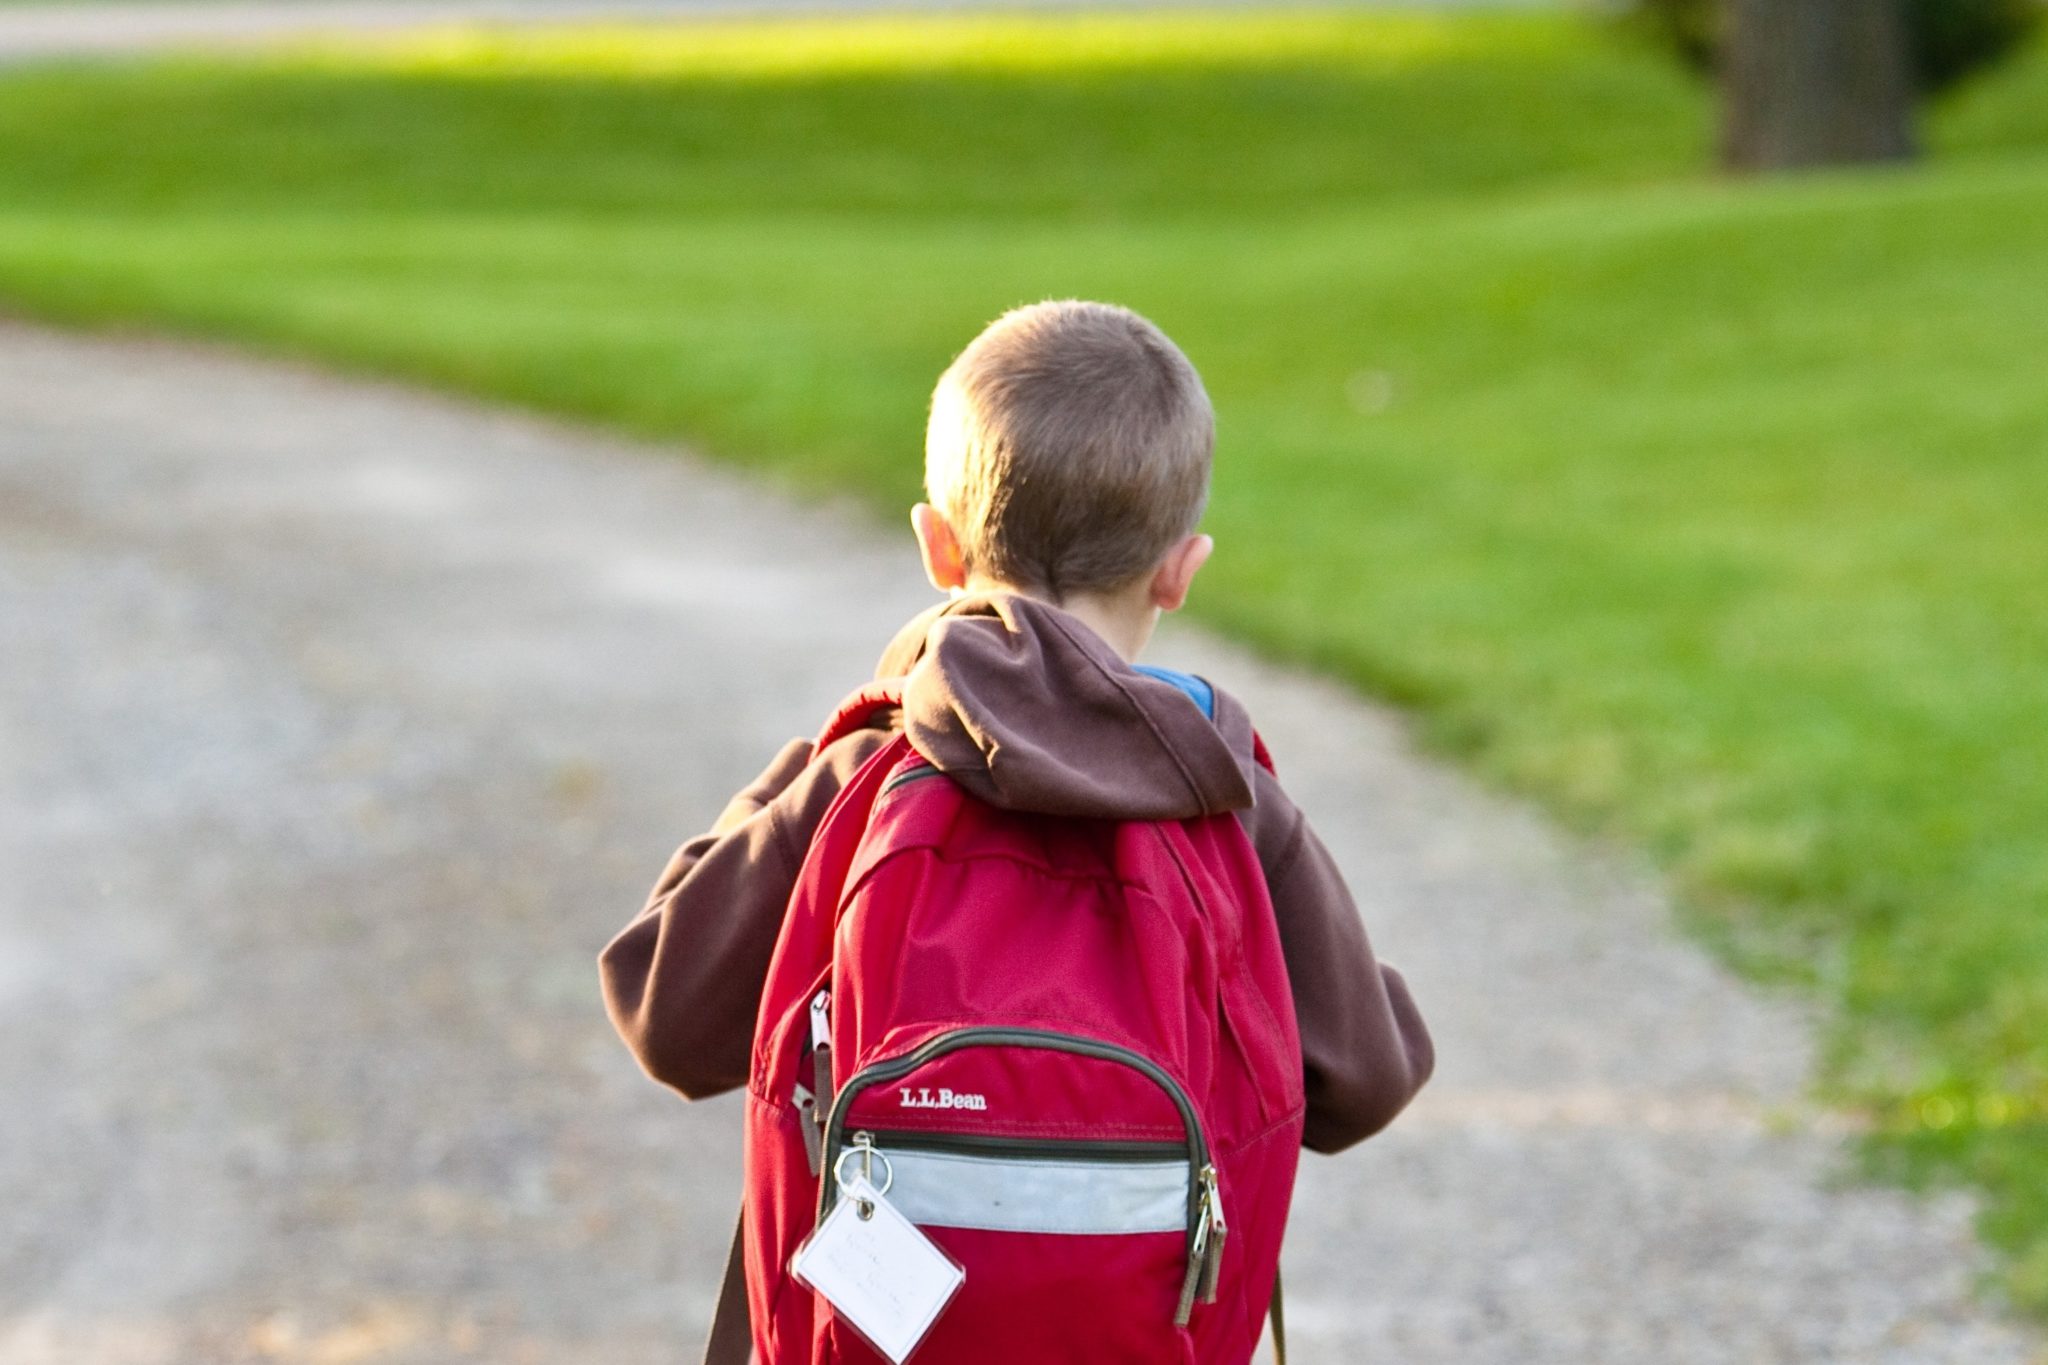 back to school with catheters in backpack